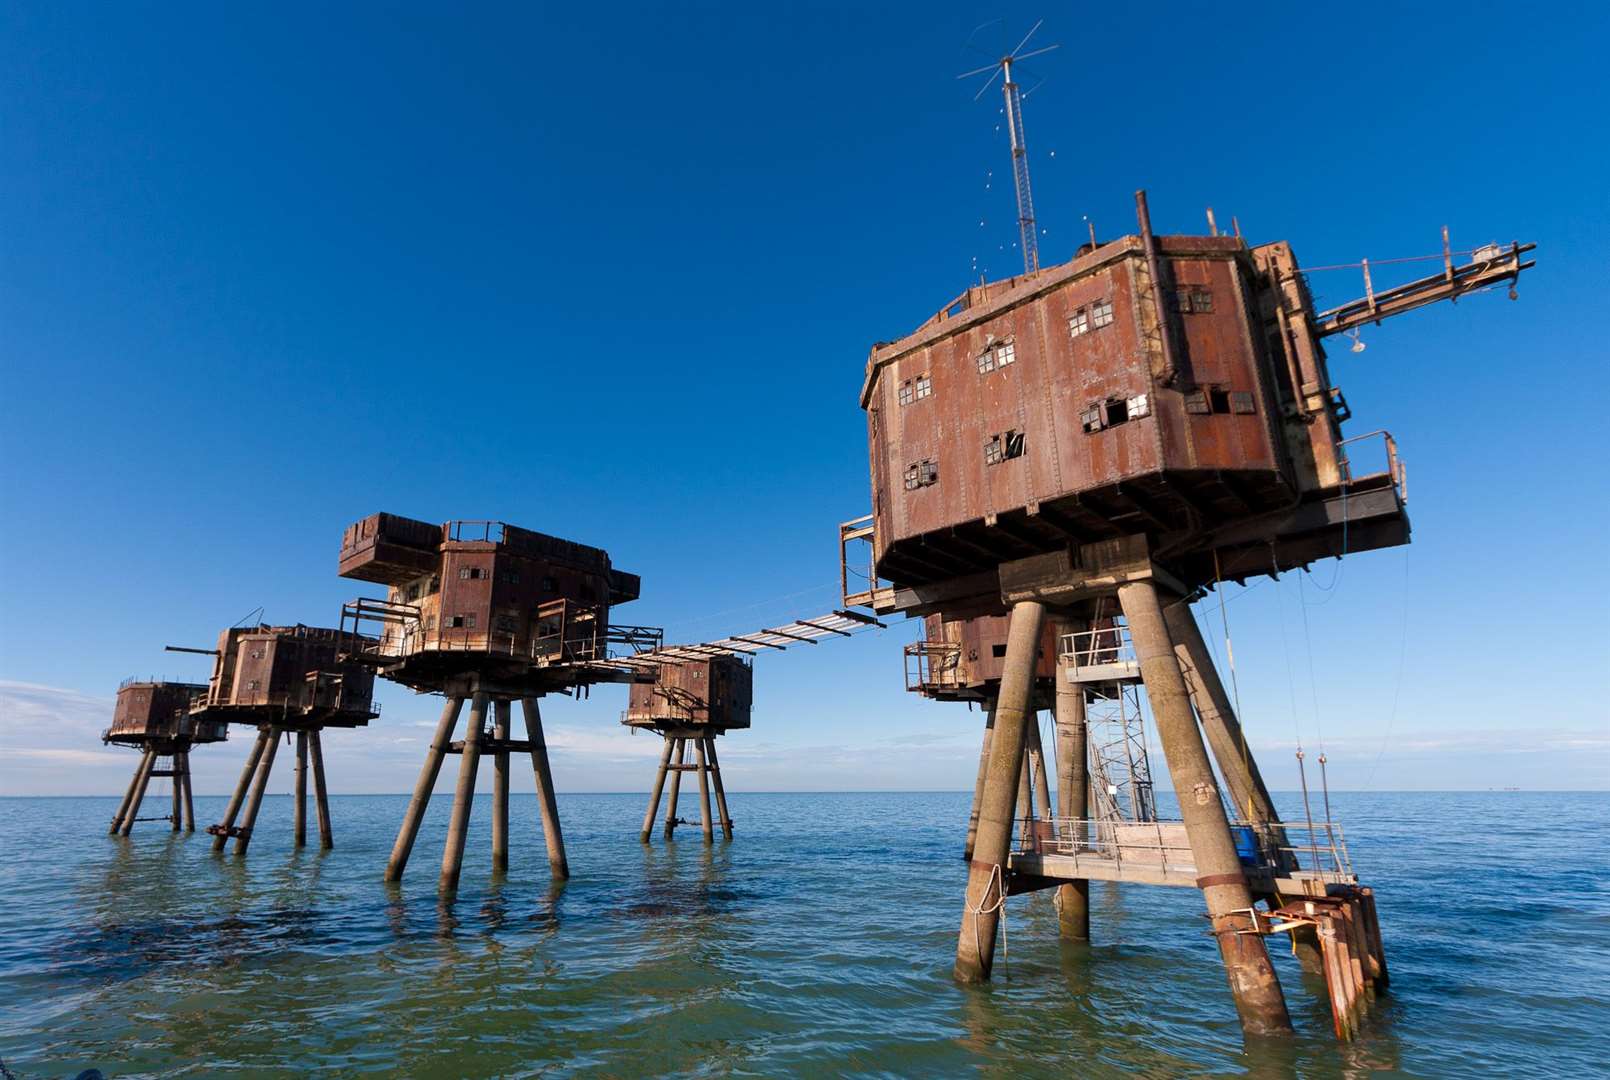 Boat trips allow you to float beneath the strange-looking structures